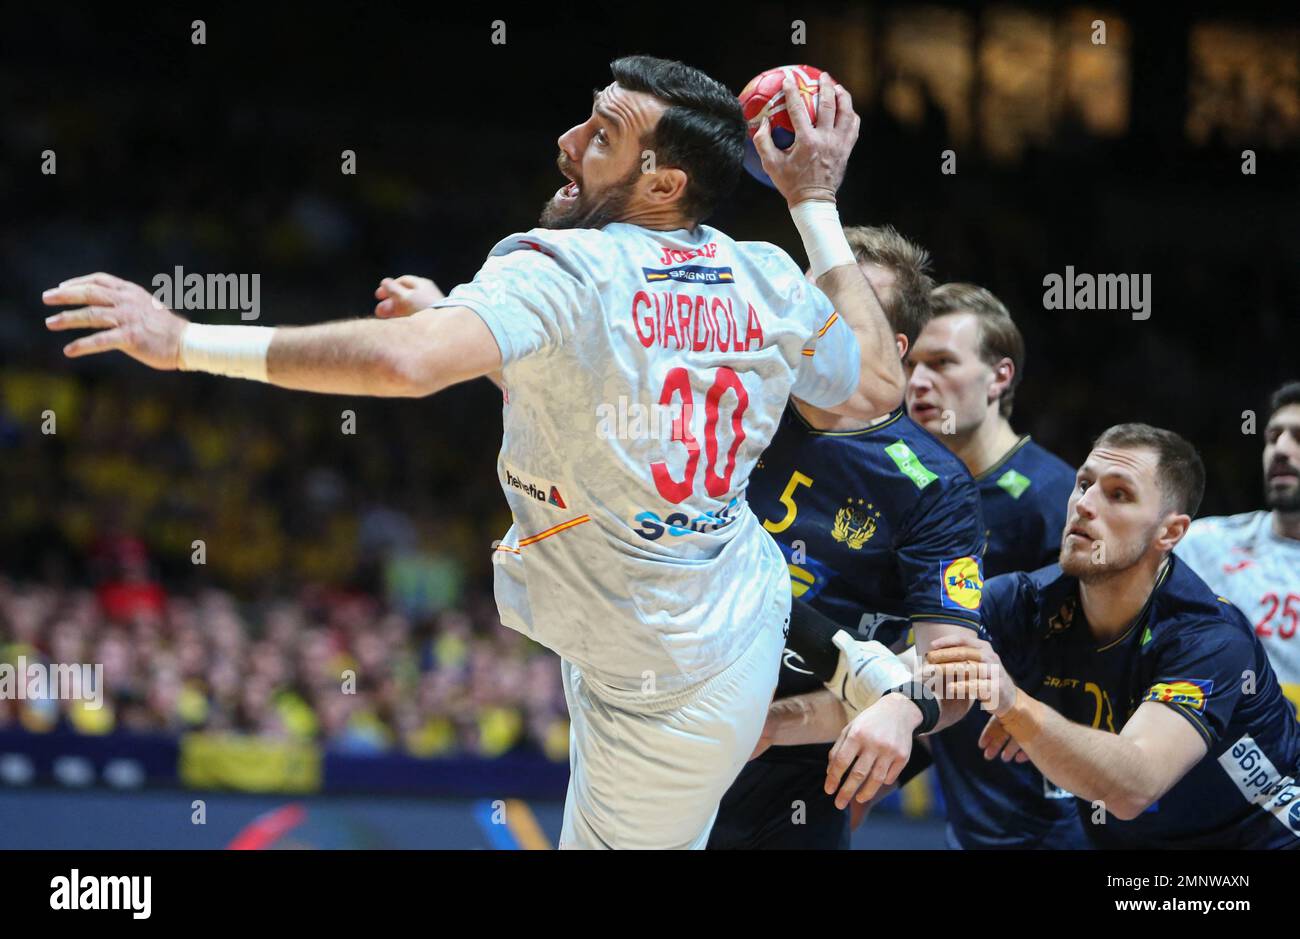 Gedeon Guardiola Villaplana of Spain during the IHF Men's World Championship 2023, Placement matches 3-4, Handball match between Sweden and Spain on January 29, 2023 at Tele2 Arena in Stockholm, Sweden. Photo by Laurent Lairys/ABACAPRESS.COM Stock Photo